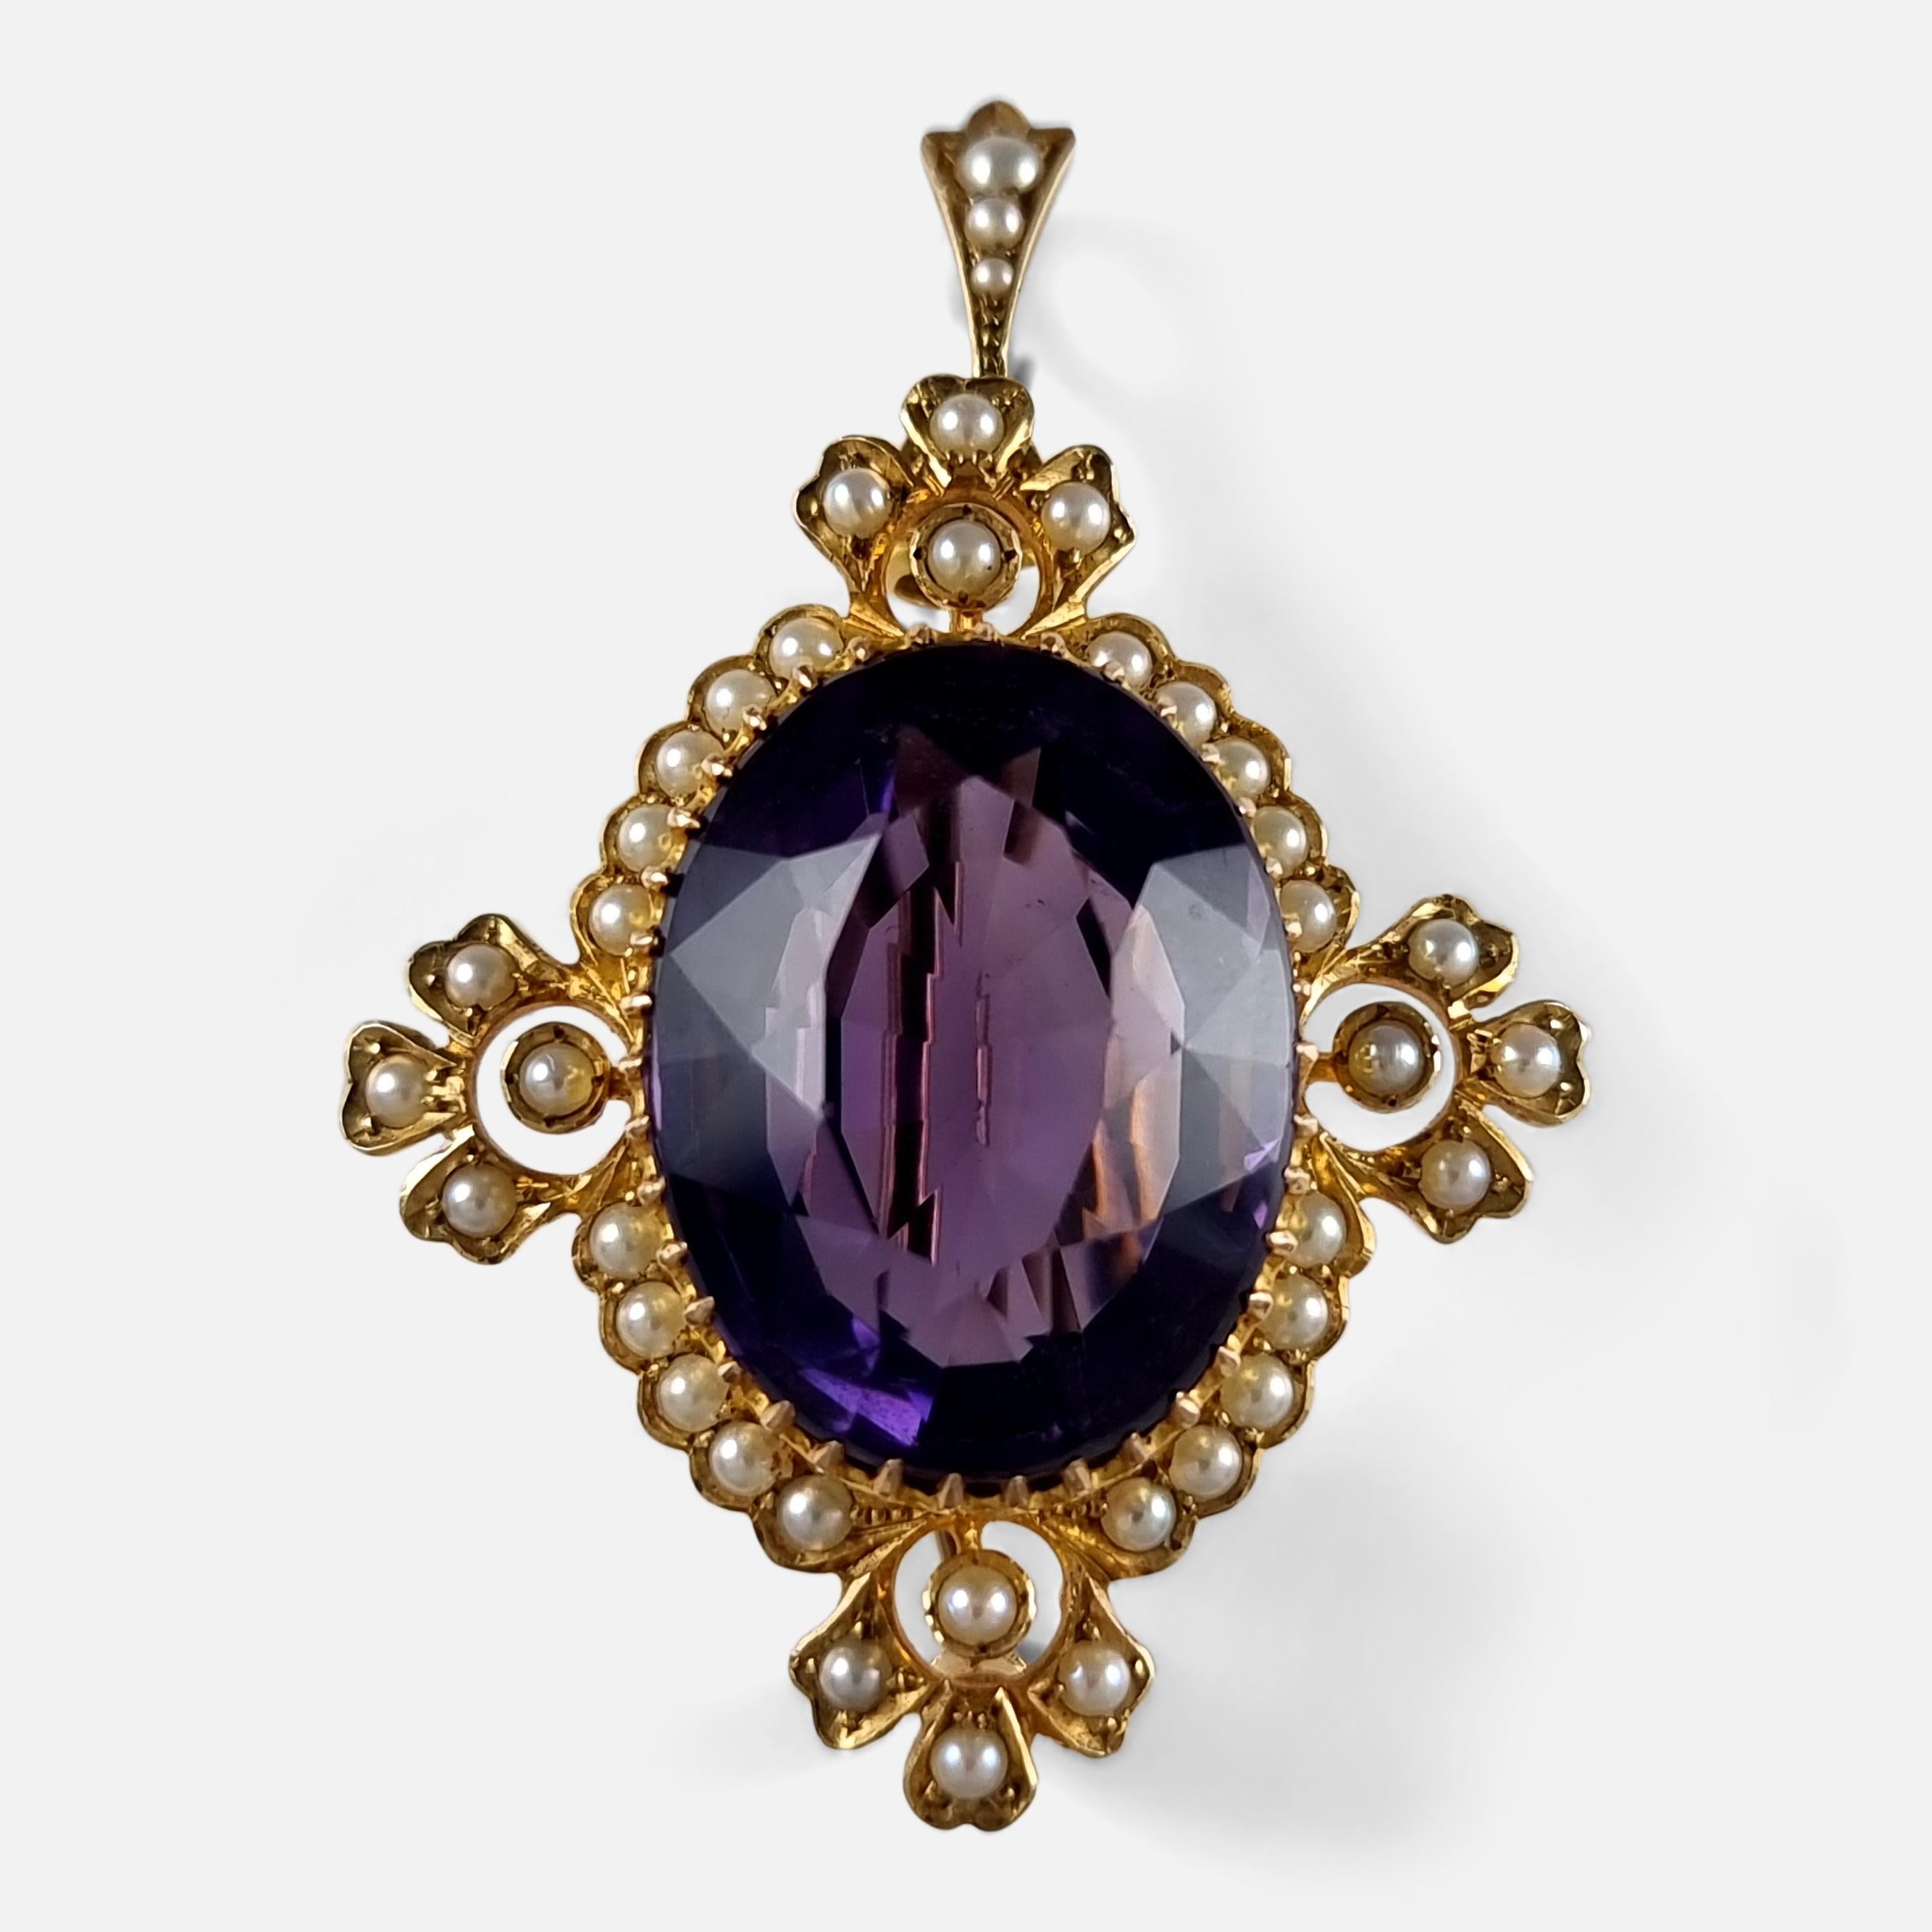 An Edwardian 15ct yellow gold amethyst and seed pearl pendant brooch. It has a detachable brooch pin, which unscrews. 

The pendant is stamped '15' to denote 15ct gold fineness. The piece is stored in its original case.

Date: - Circa